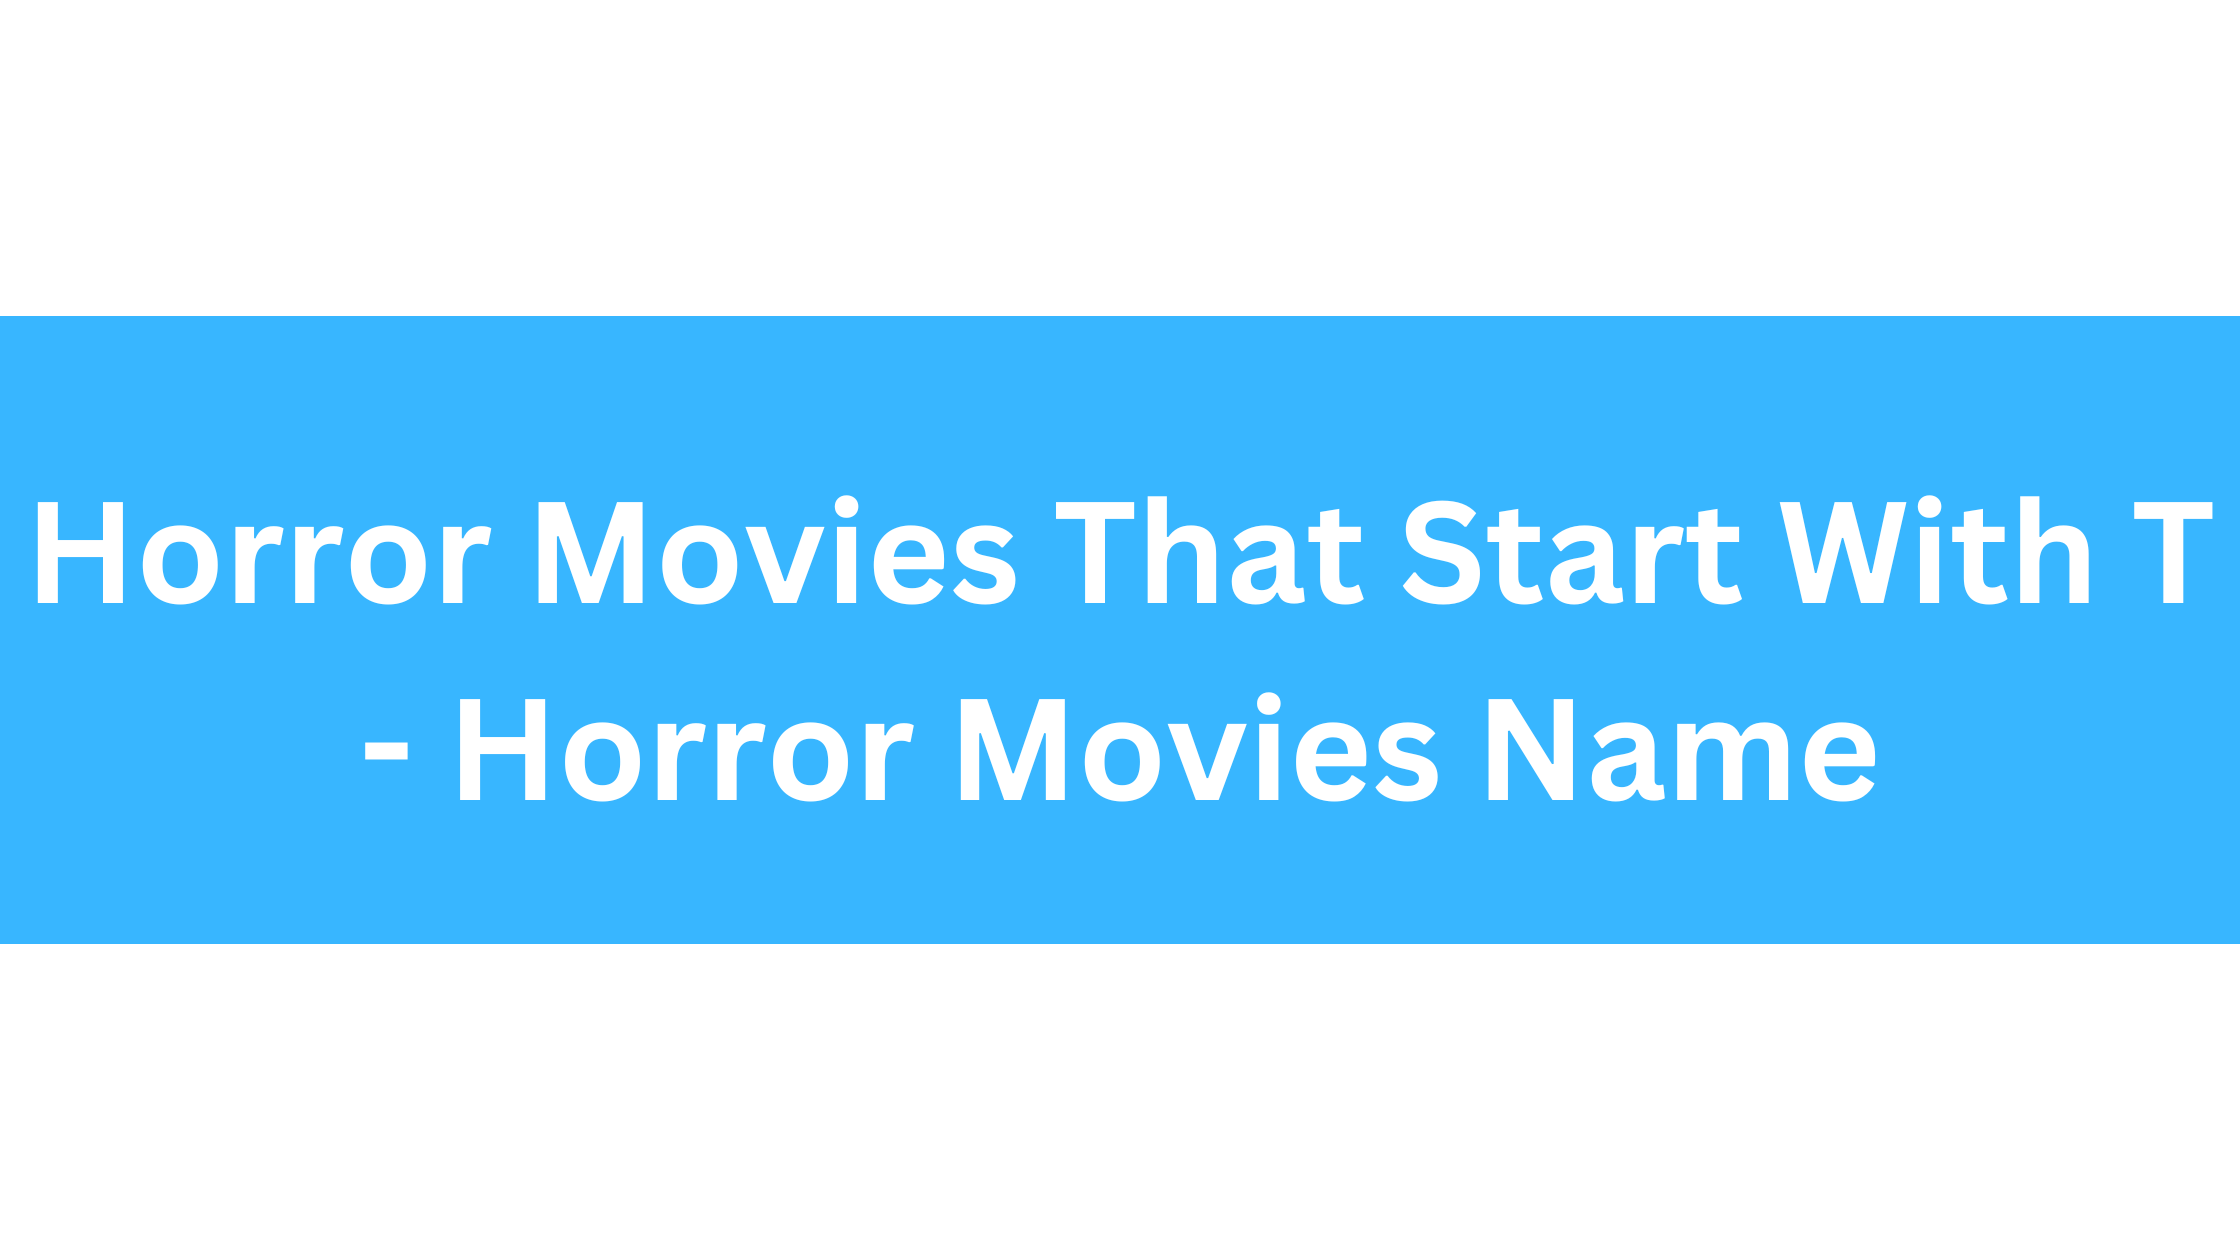 Horror Movies That Start With T